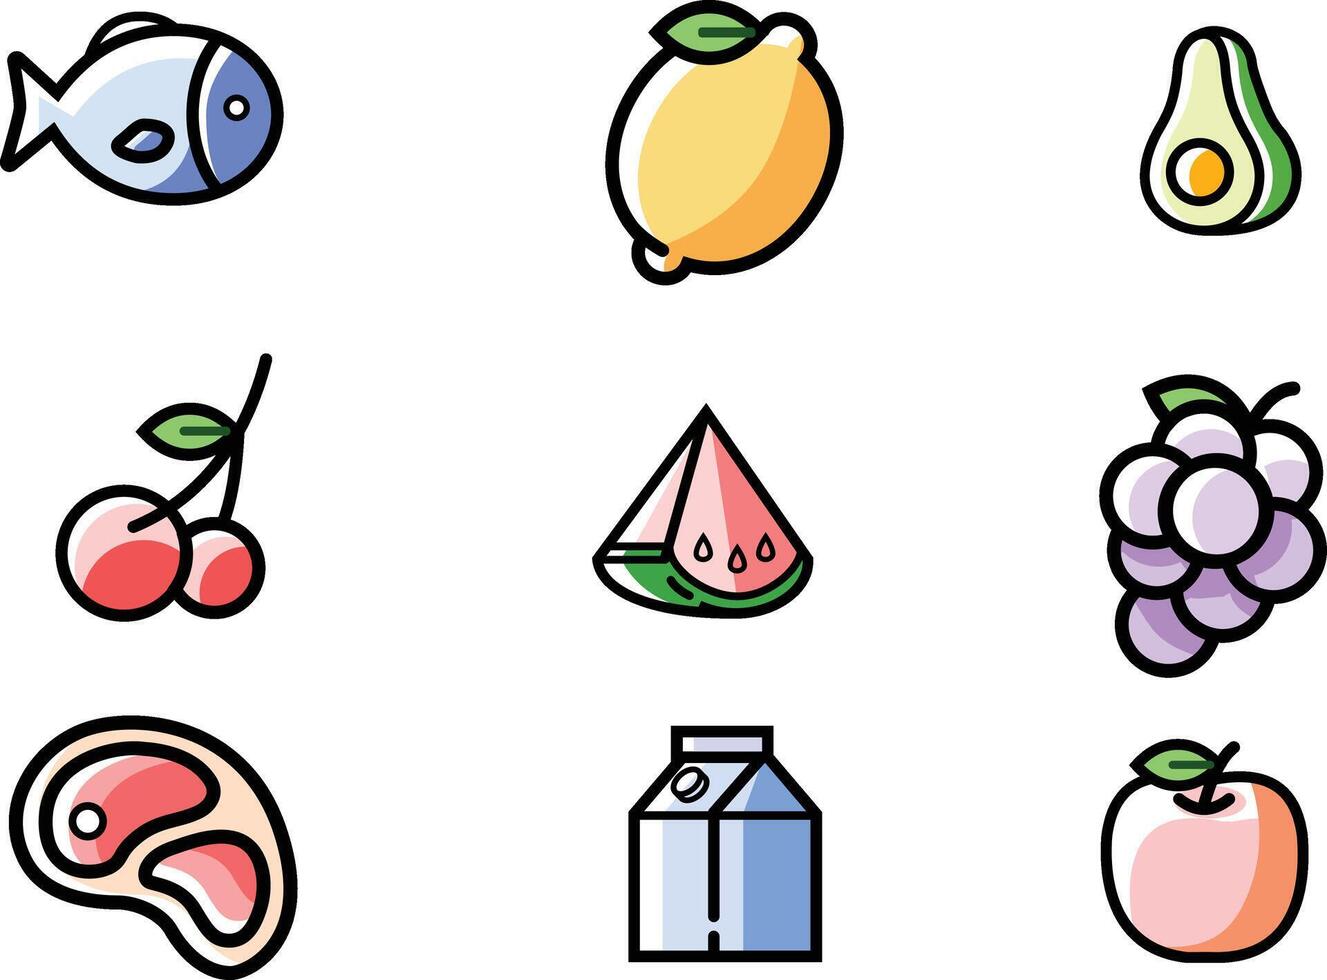 food set icons with healthy and unhealthy items vector illustration